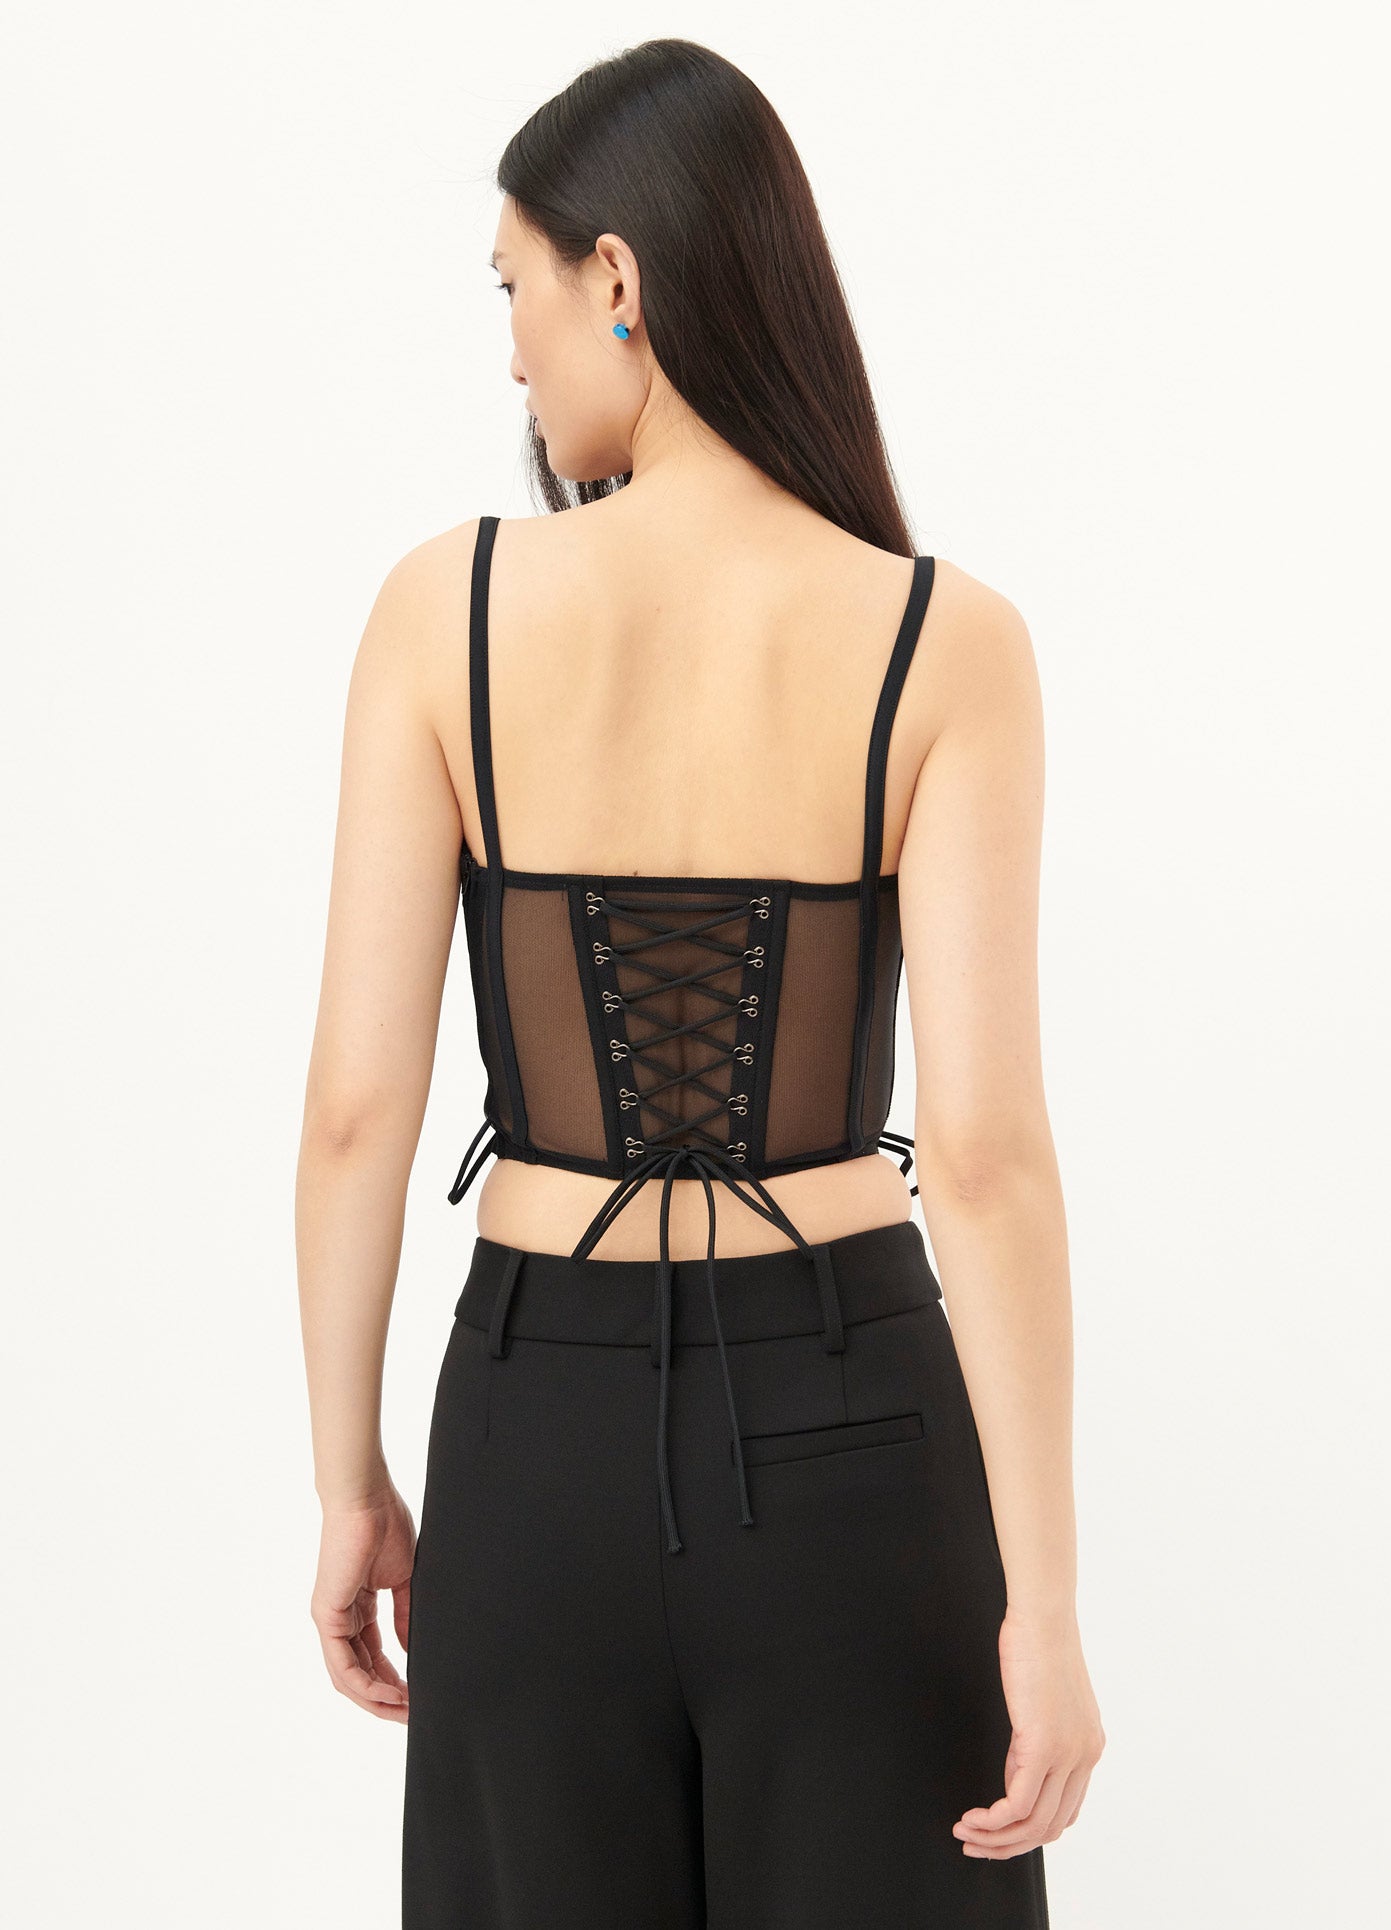 MONSE Laced Bustier in Black on Model Back View